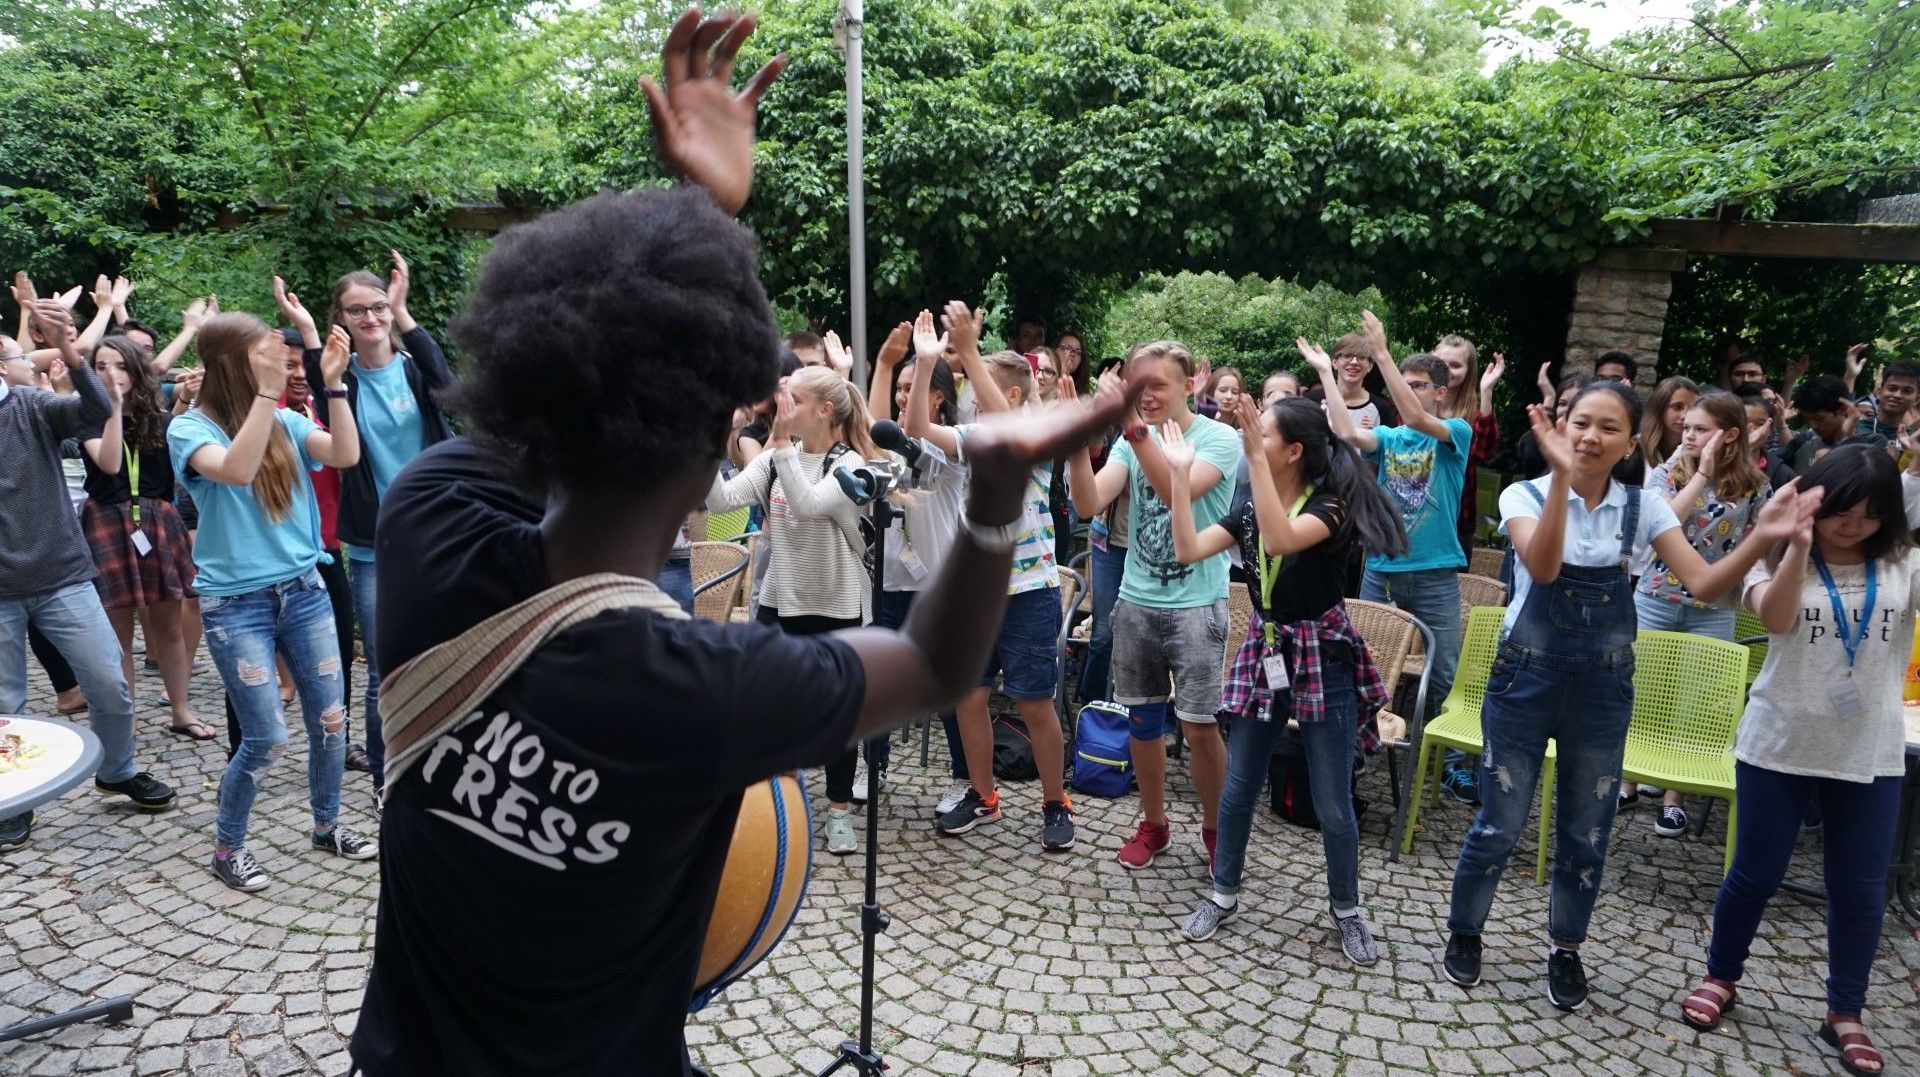 The musician Ezé performing for a group of young people who are clapping along